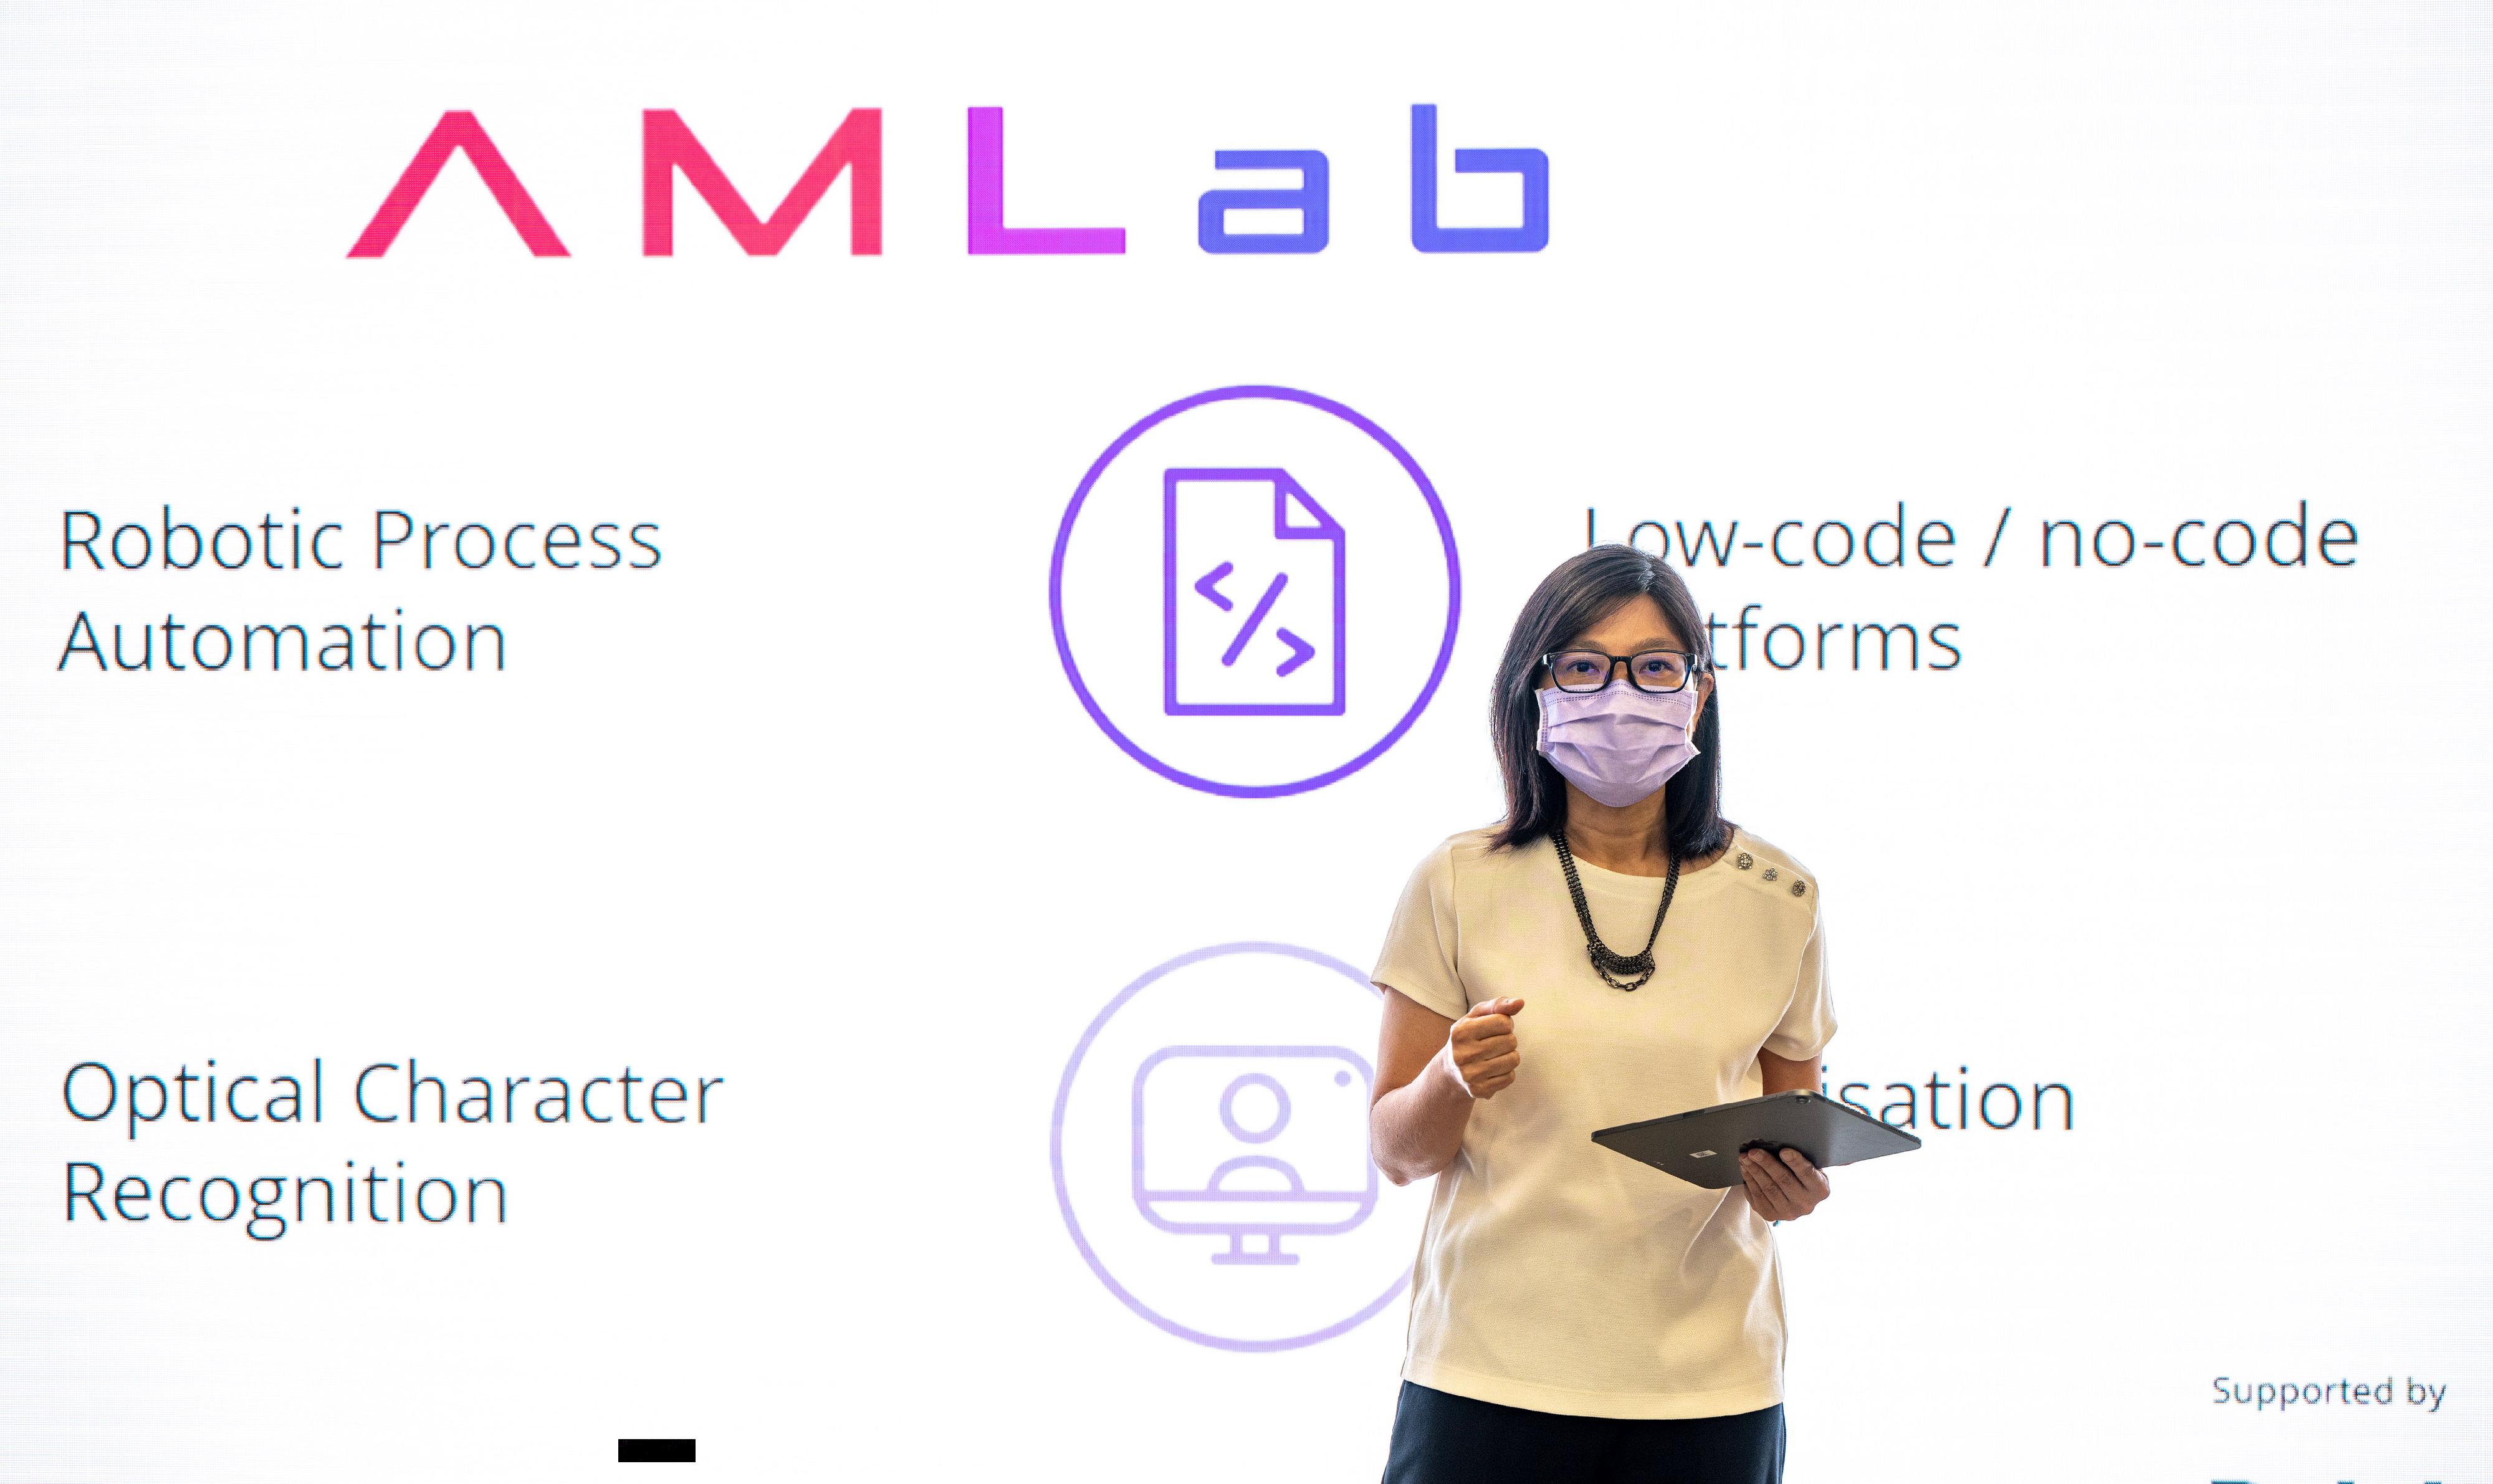 The Hong Kong Monetary Authority (HKMA) and Cyberport, supported by Deloitte, co-organised today (July 21) the second Anti-Money Laundering (AML) Regtech Lab (AMLab). Photo shows the Executive Director (Enforcement and AML) of the HKMA, Ms Carmen Chu, delivering remarks at the second AMLab session.